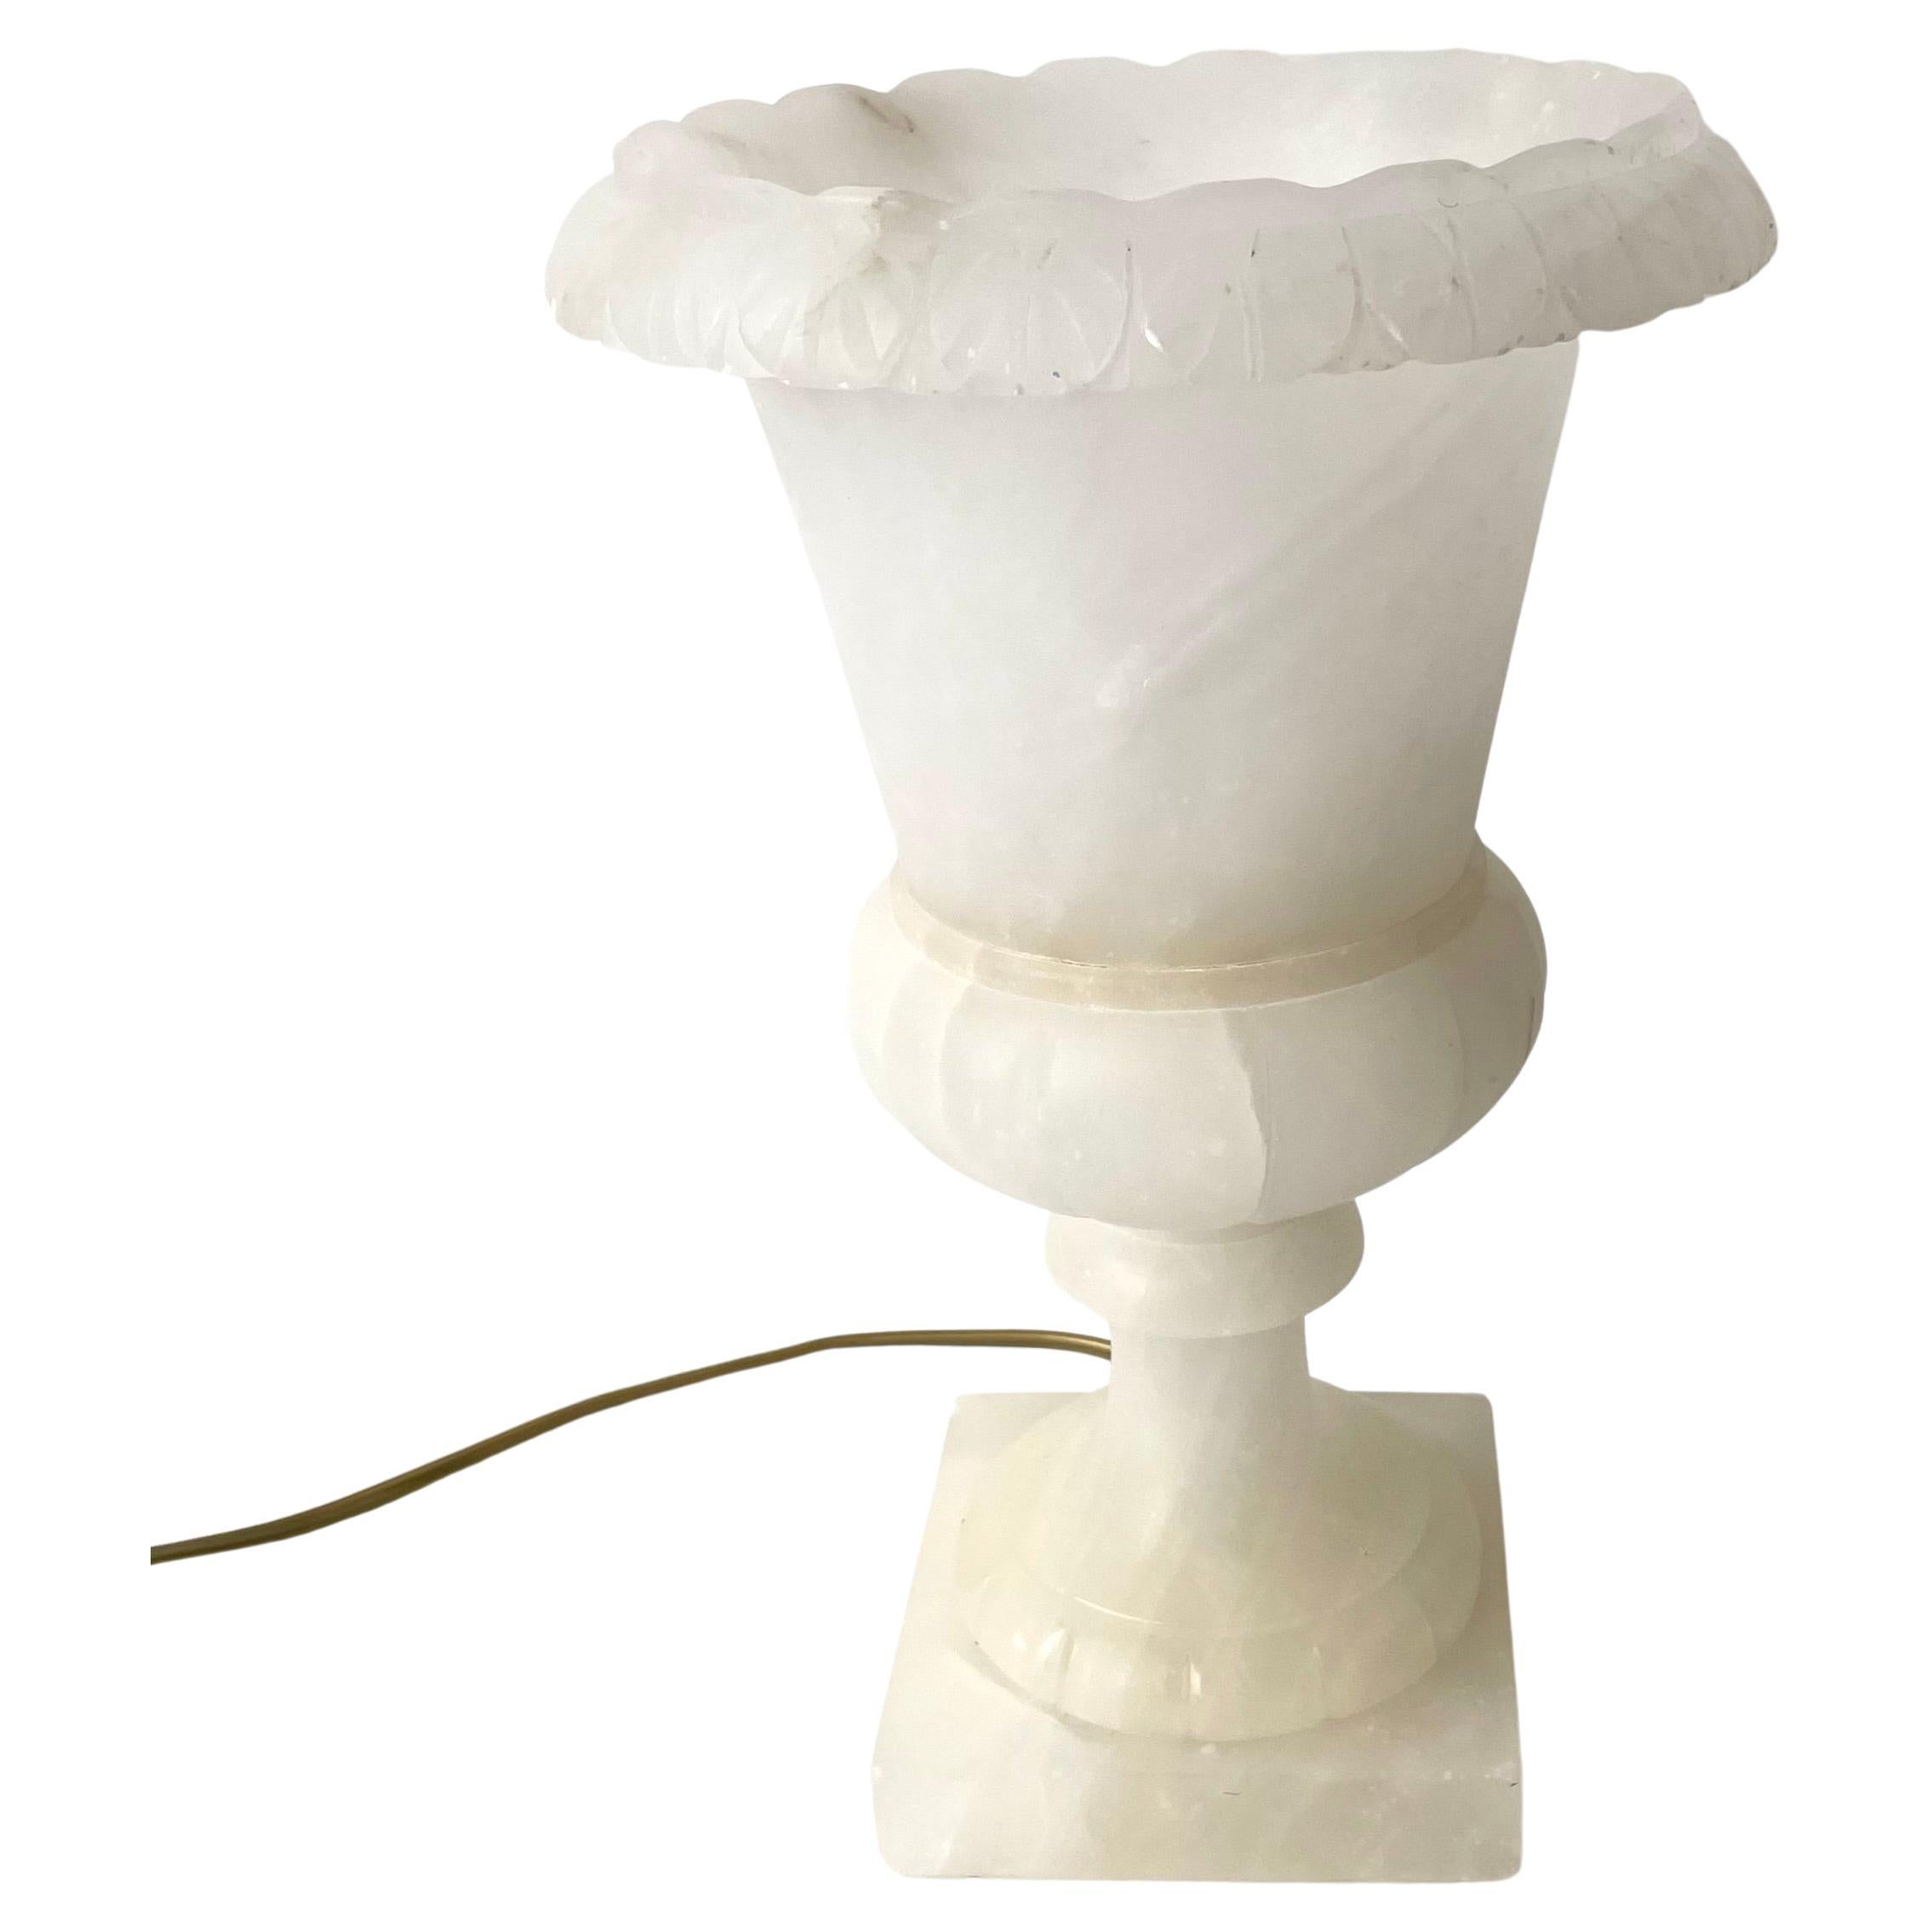 Elegant Alabaster Table Lamp in the Shape of a Classical Urn, Early 20th Century For Sale